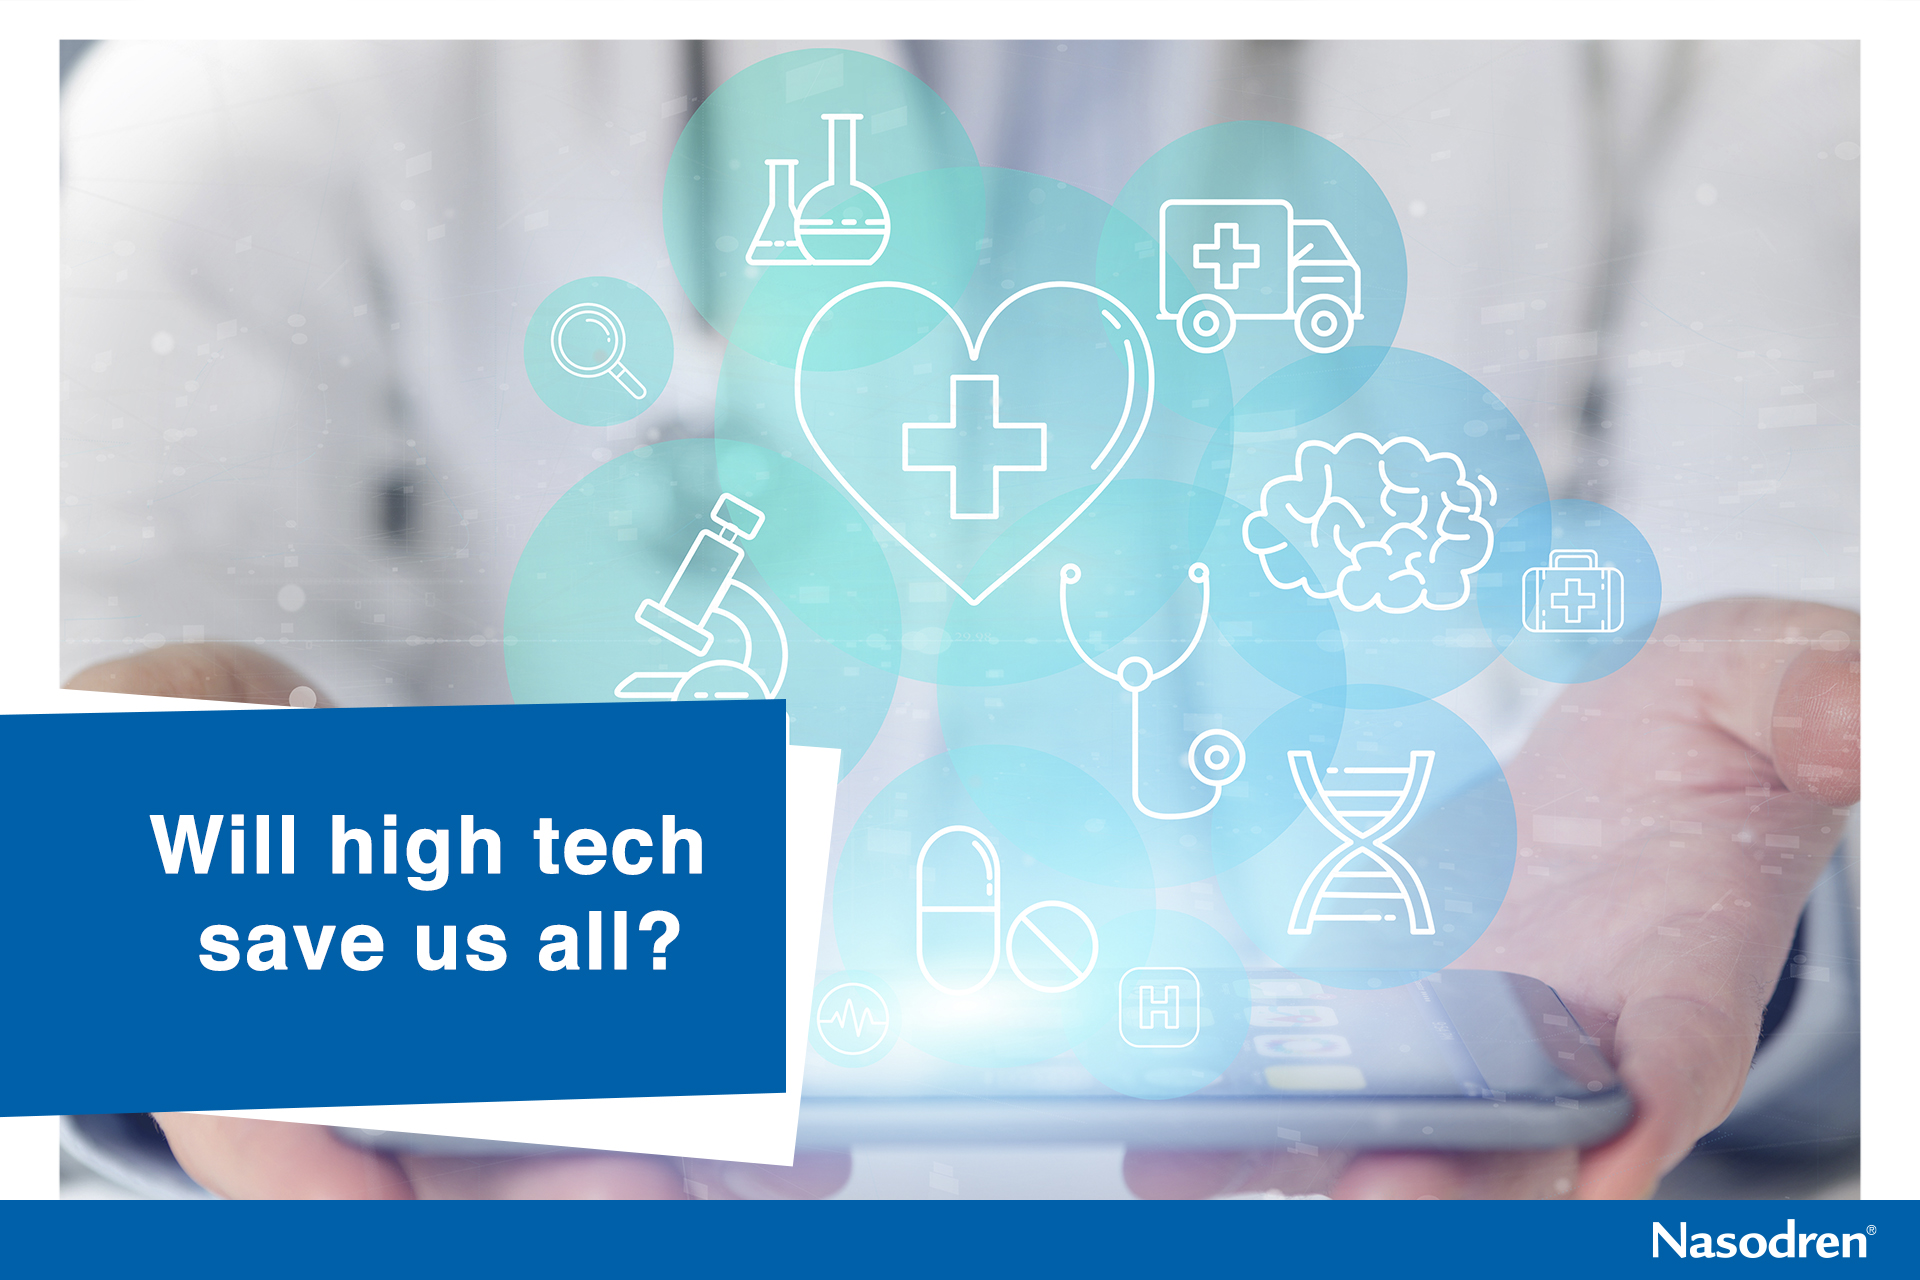 High tech in healthcare and medicine